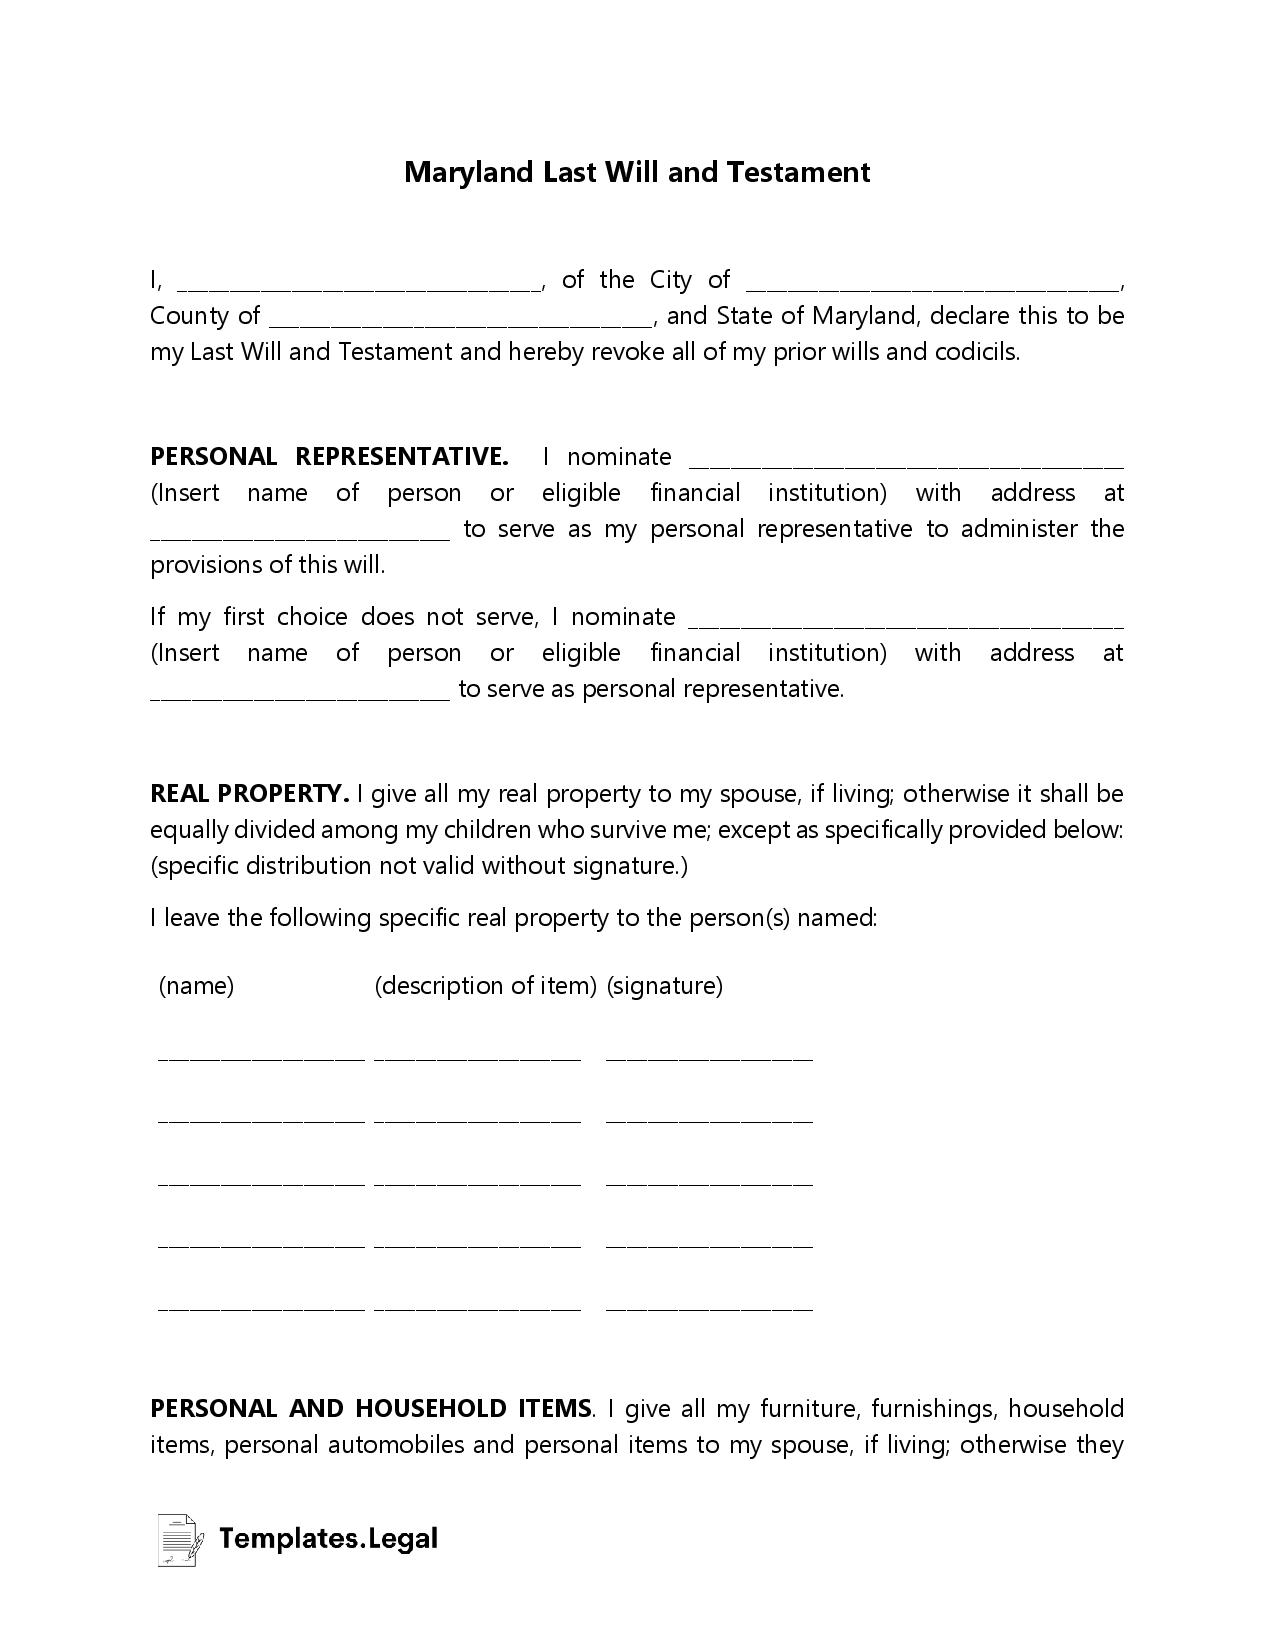 Maryland Last Will and Testament - Templates.Legal